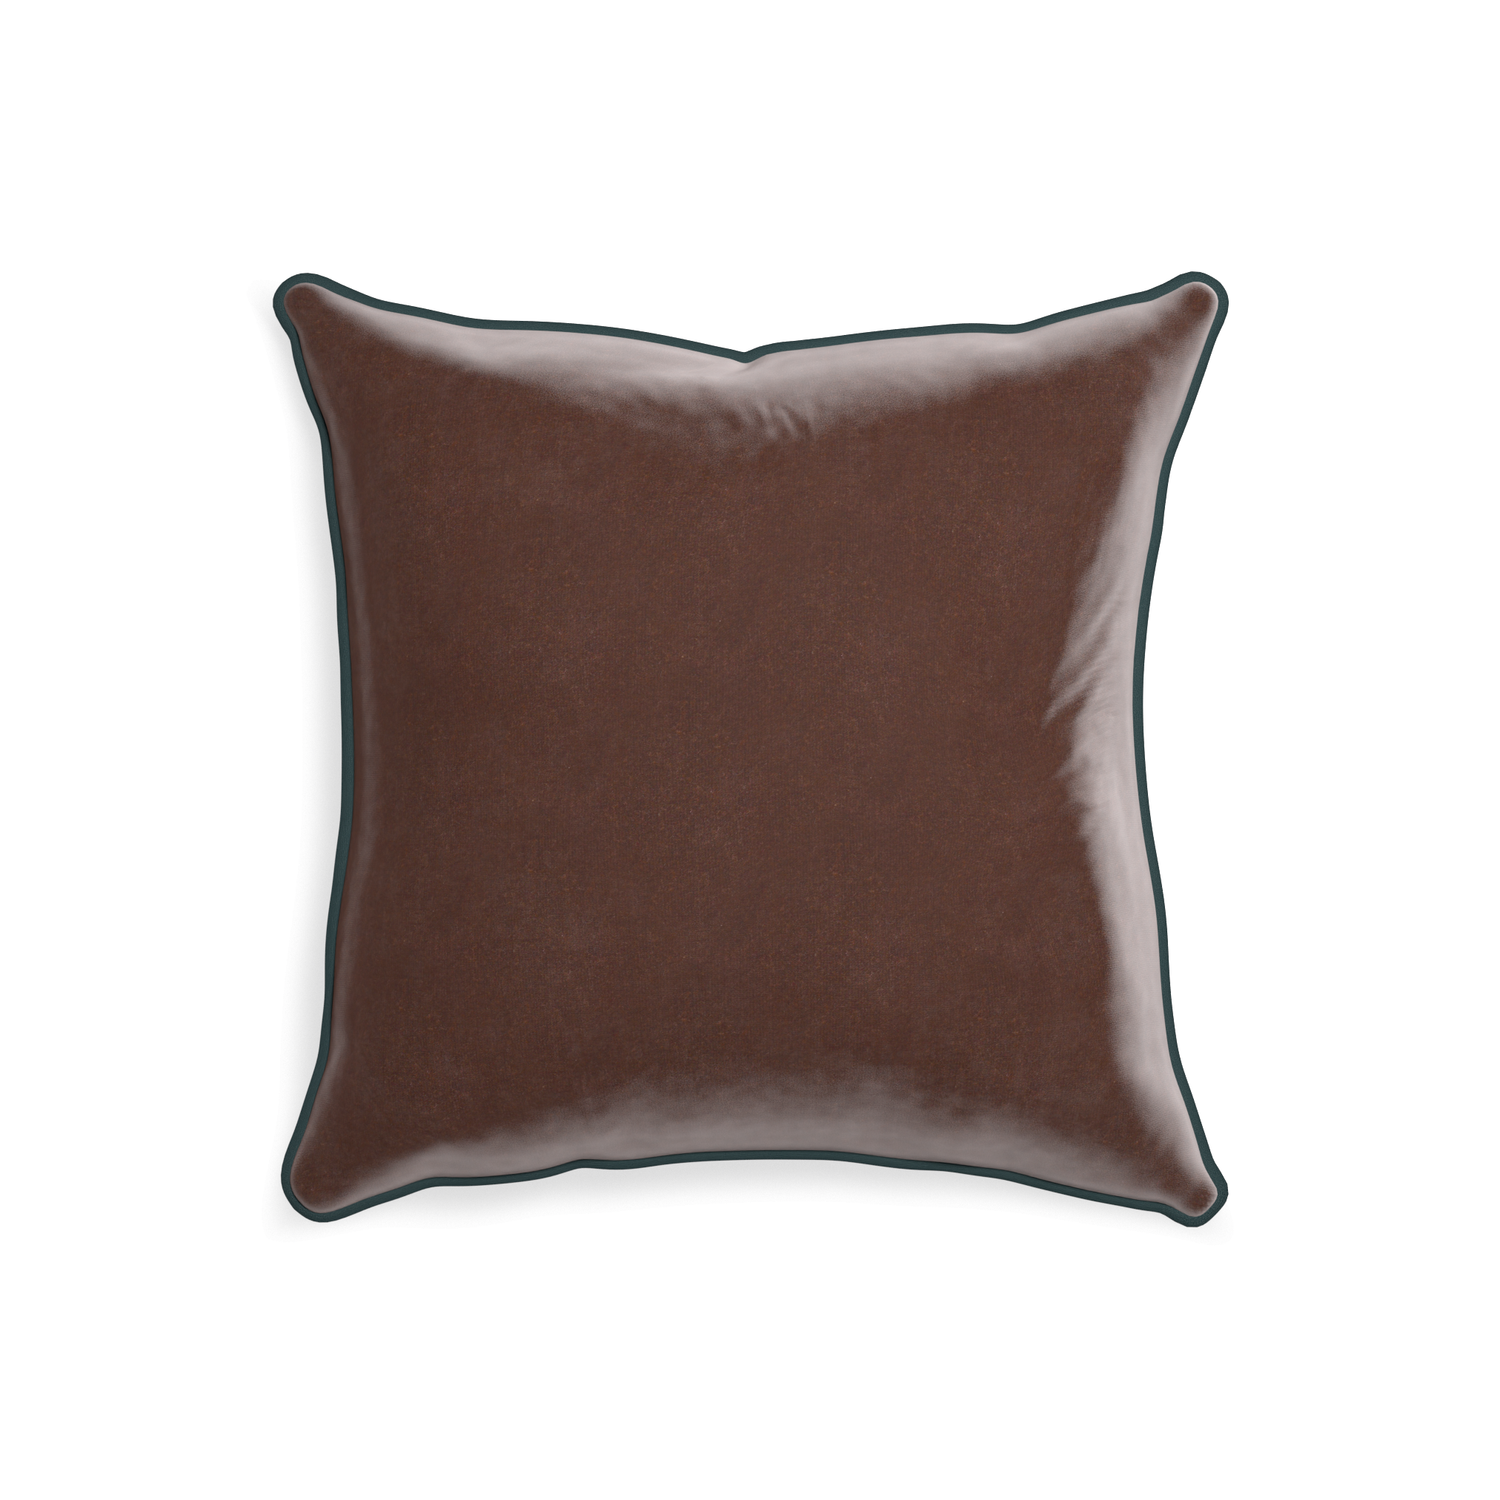 20-square walnut velvet custom brownpillow with p piping on white background